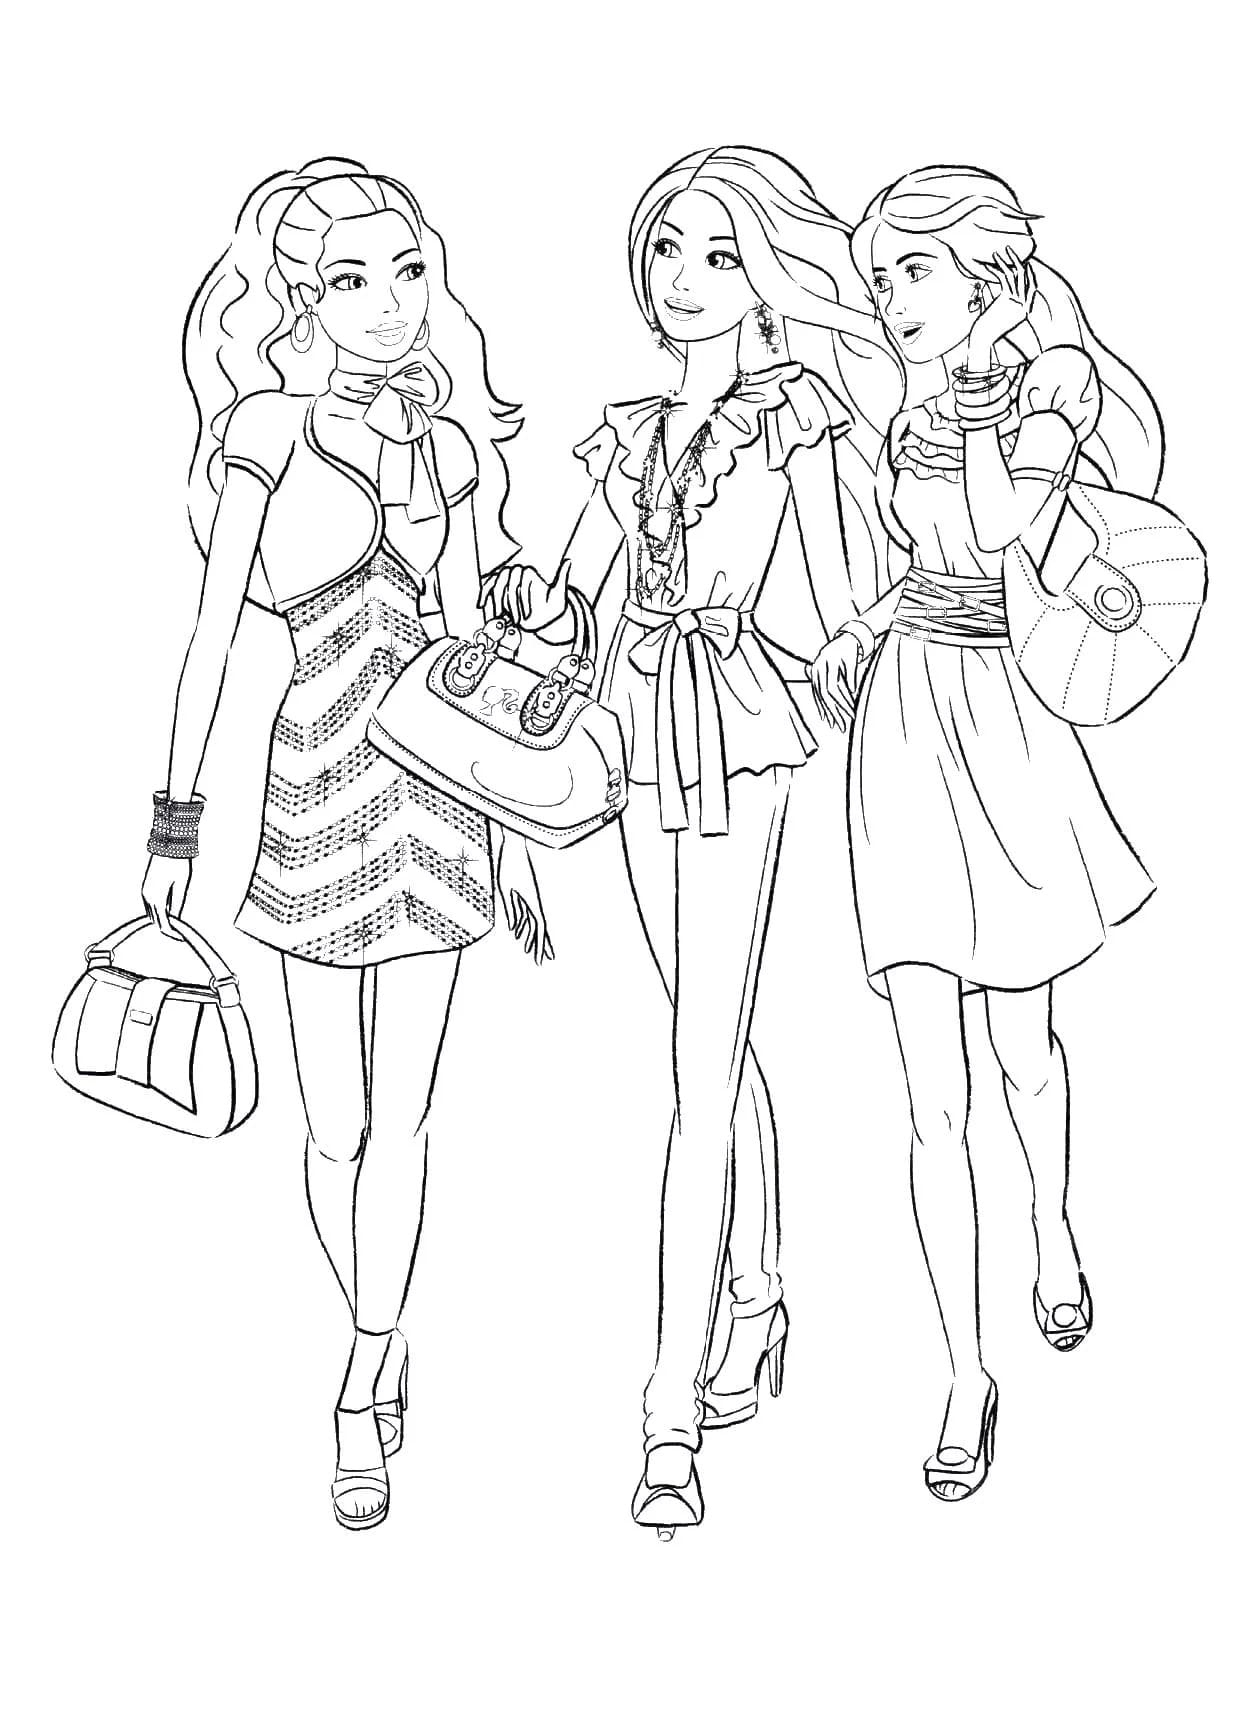 Printable Barbie And Friends Coloring Pages Pdf - Barbie And Friends Coloring Pages